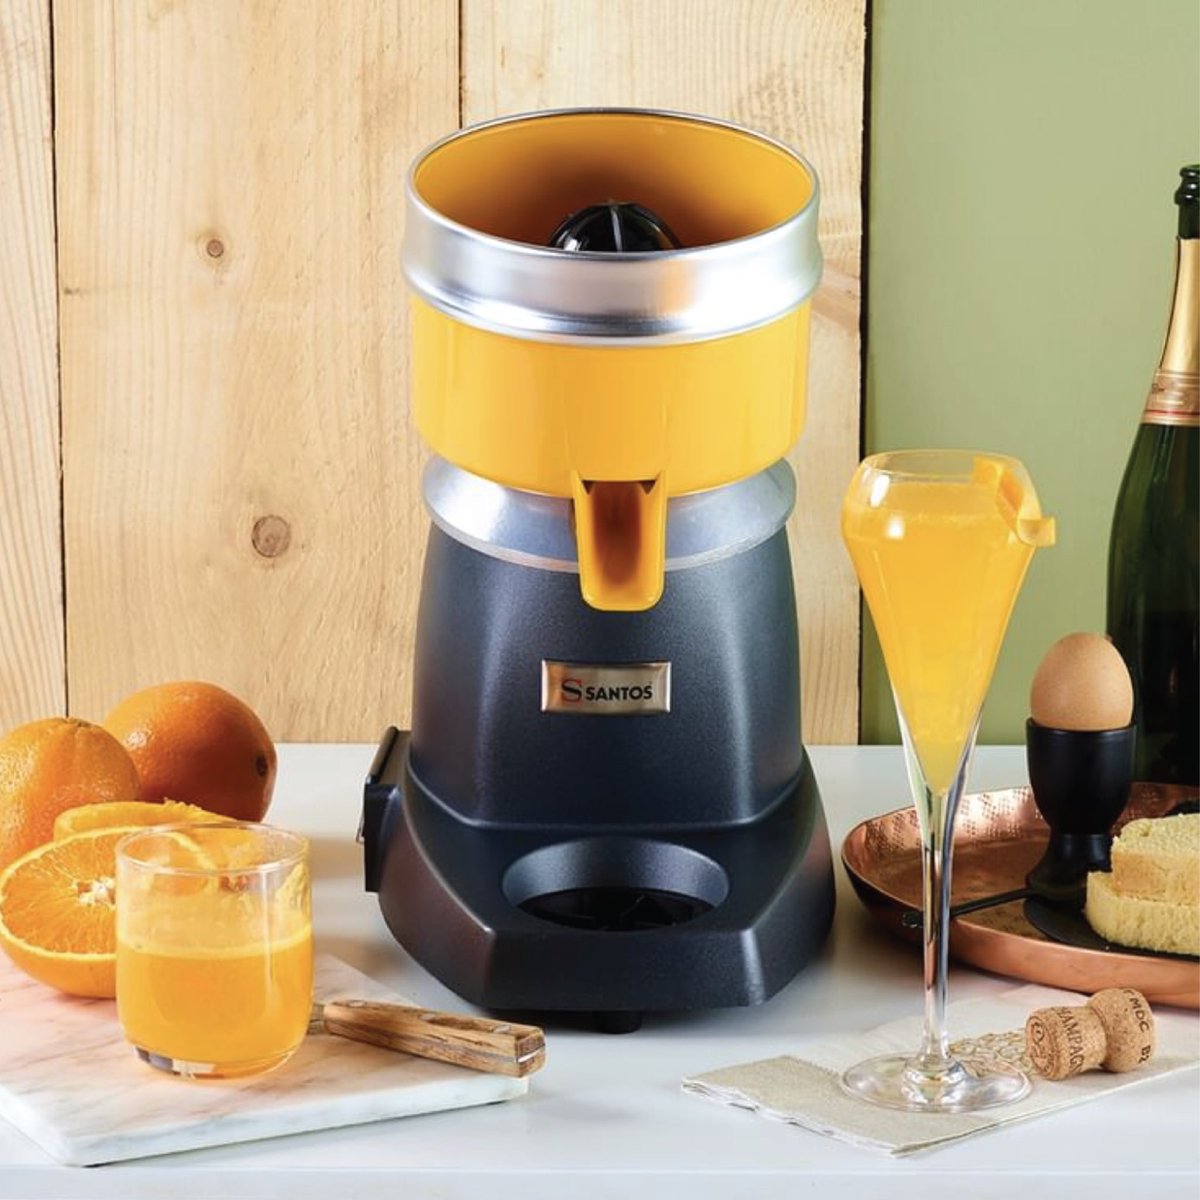 Are you looking for an easy but delicious cocktail recipe? Well you’re in luck because you only need 2 ingredients to make a Mimosa: 1 orange and 8 cl of champagne

#santosaddict #professionaljuicers #restofair #restofairrak #hospitality #horeca #tableware
 
@SantosAddict